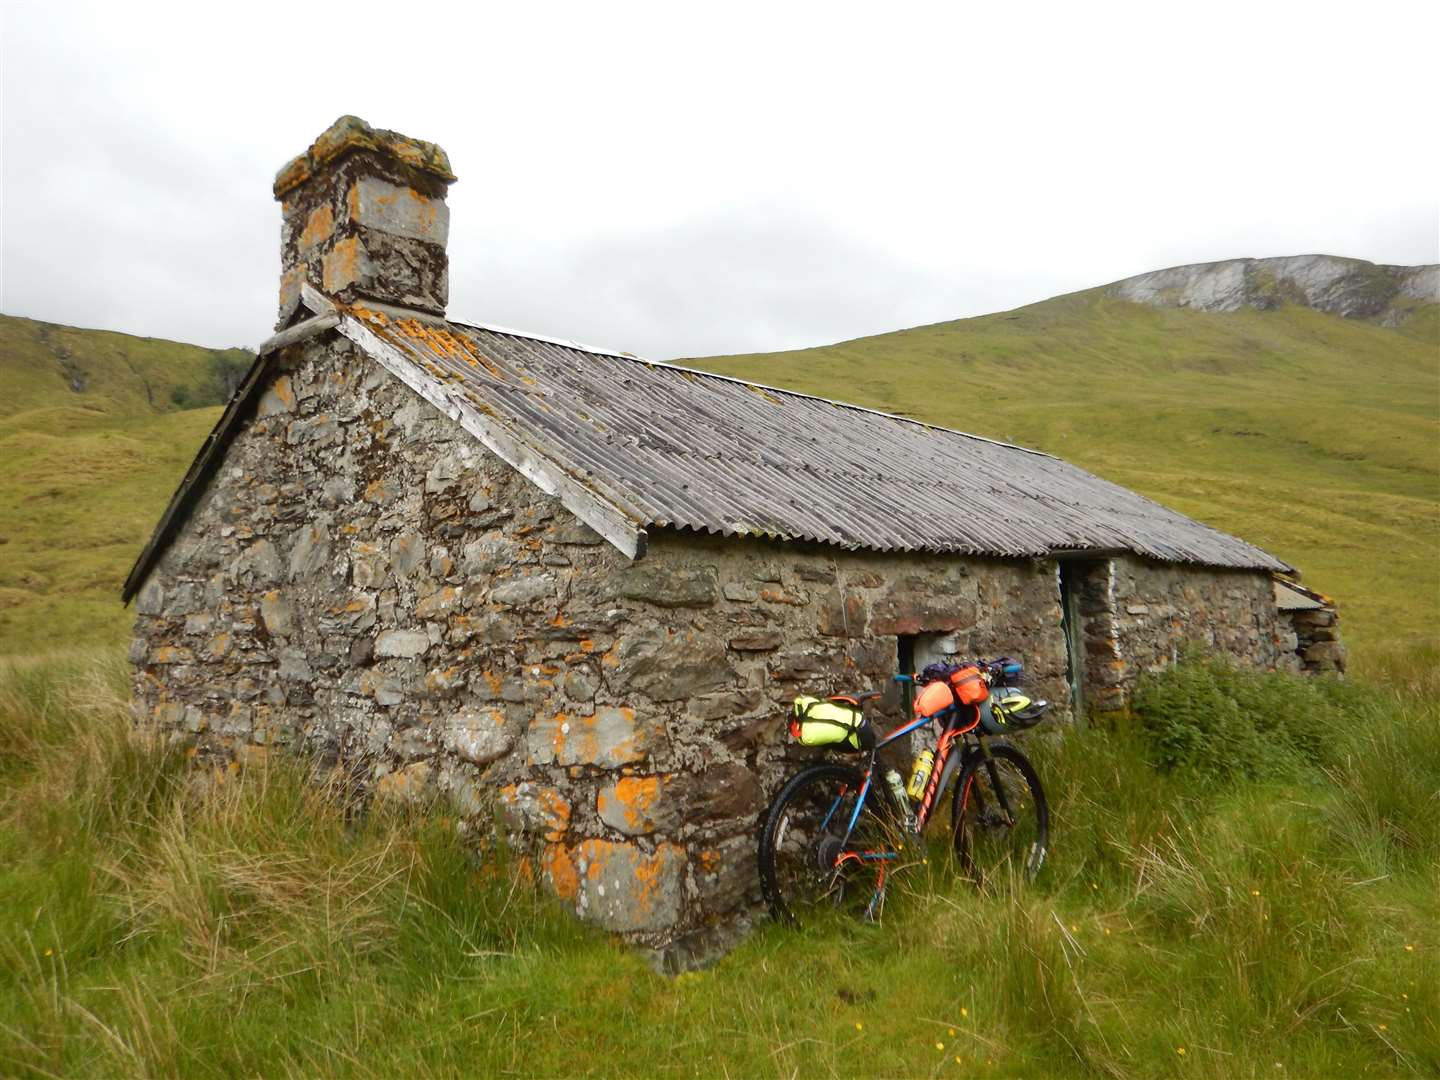 At Glenbeag bothy for an overnight stay between Inverness to Ullapool.